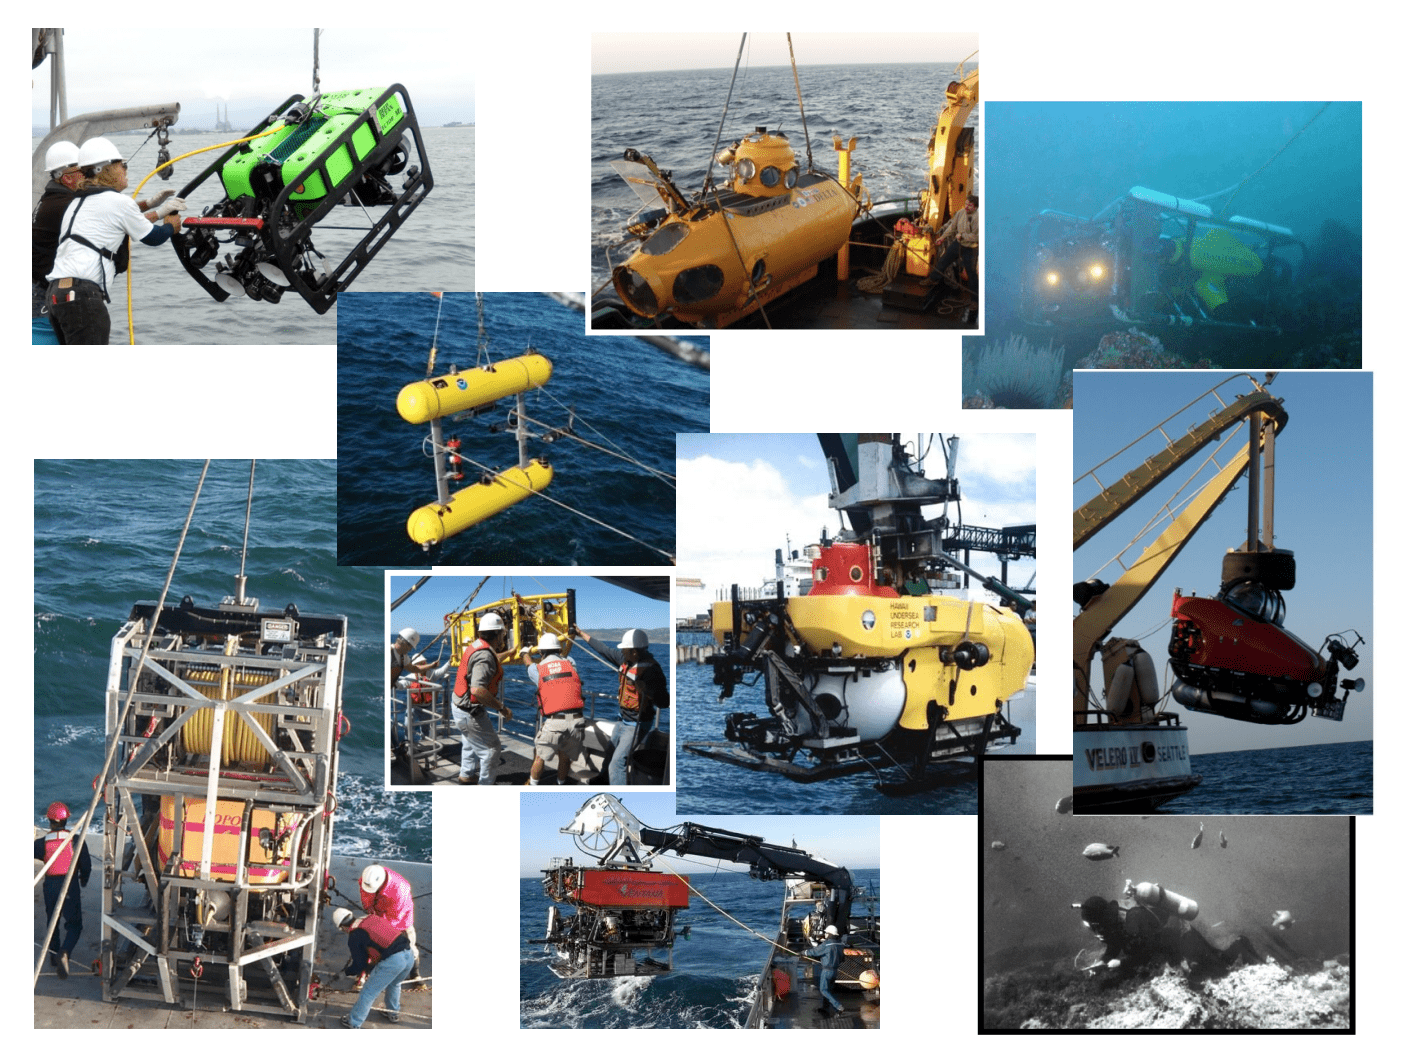 June 2015 - A COMPARATIVE ASSESSMENT OF UNDERWATER VISUAL SURVEY TOOLS: 164